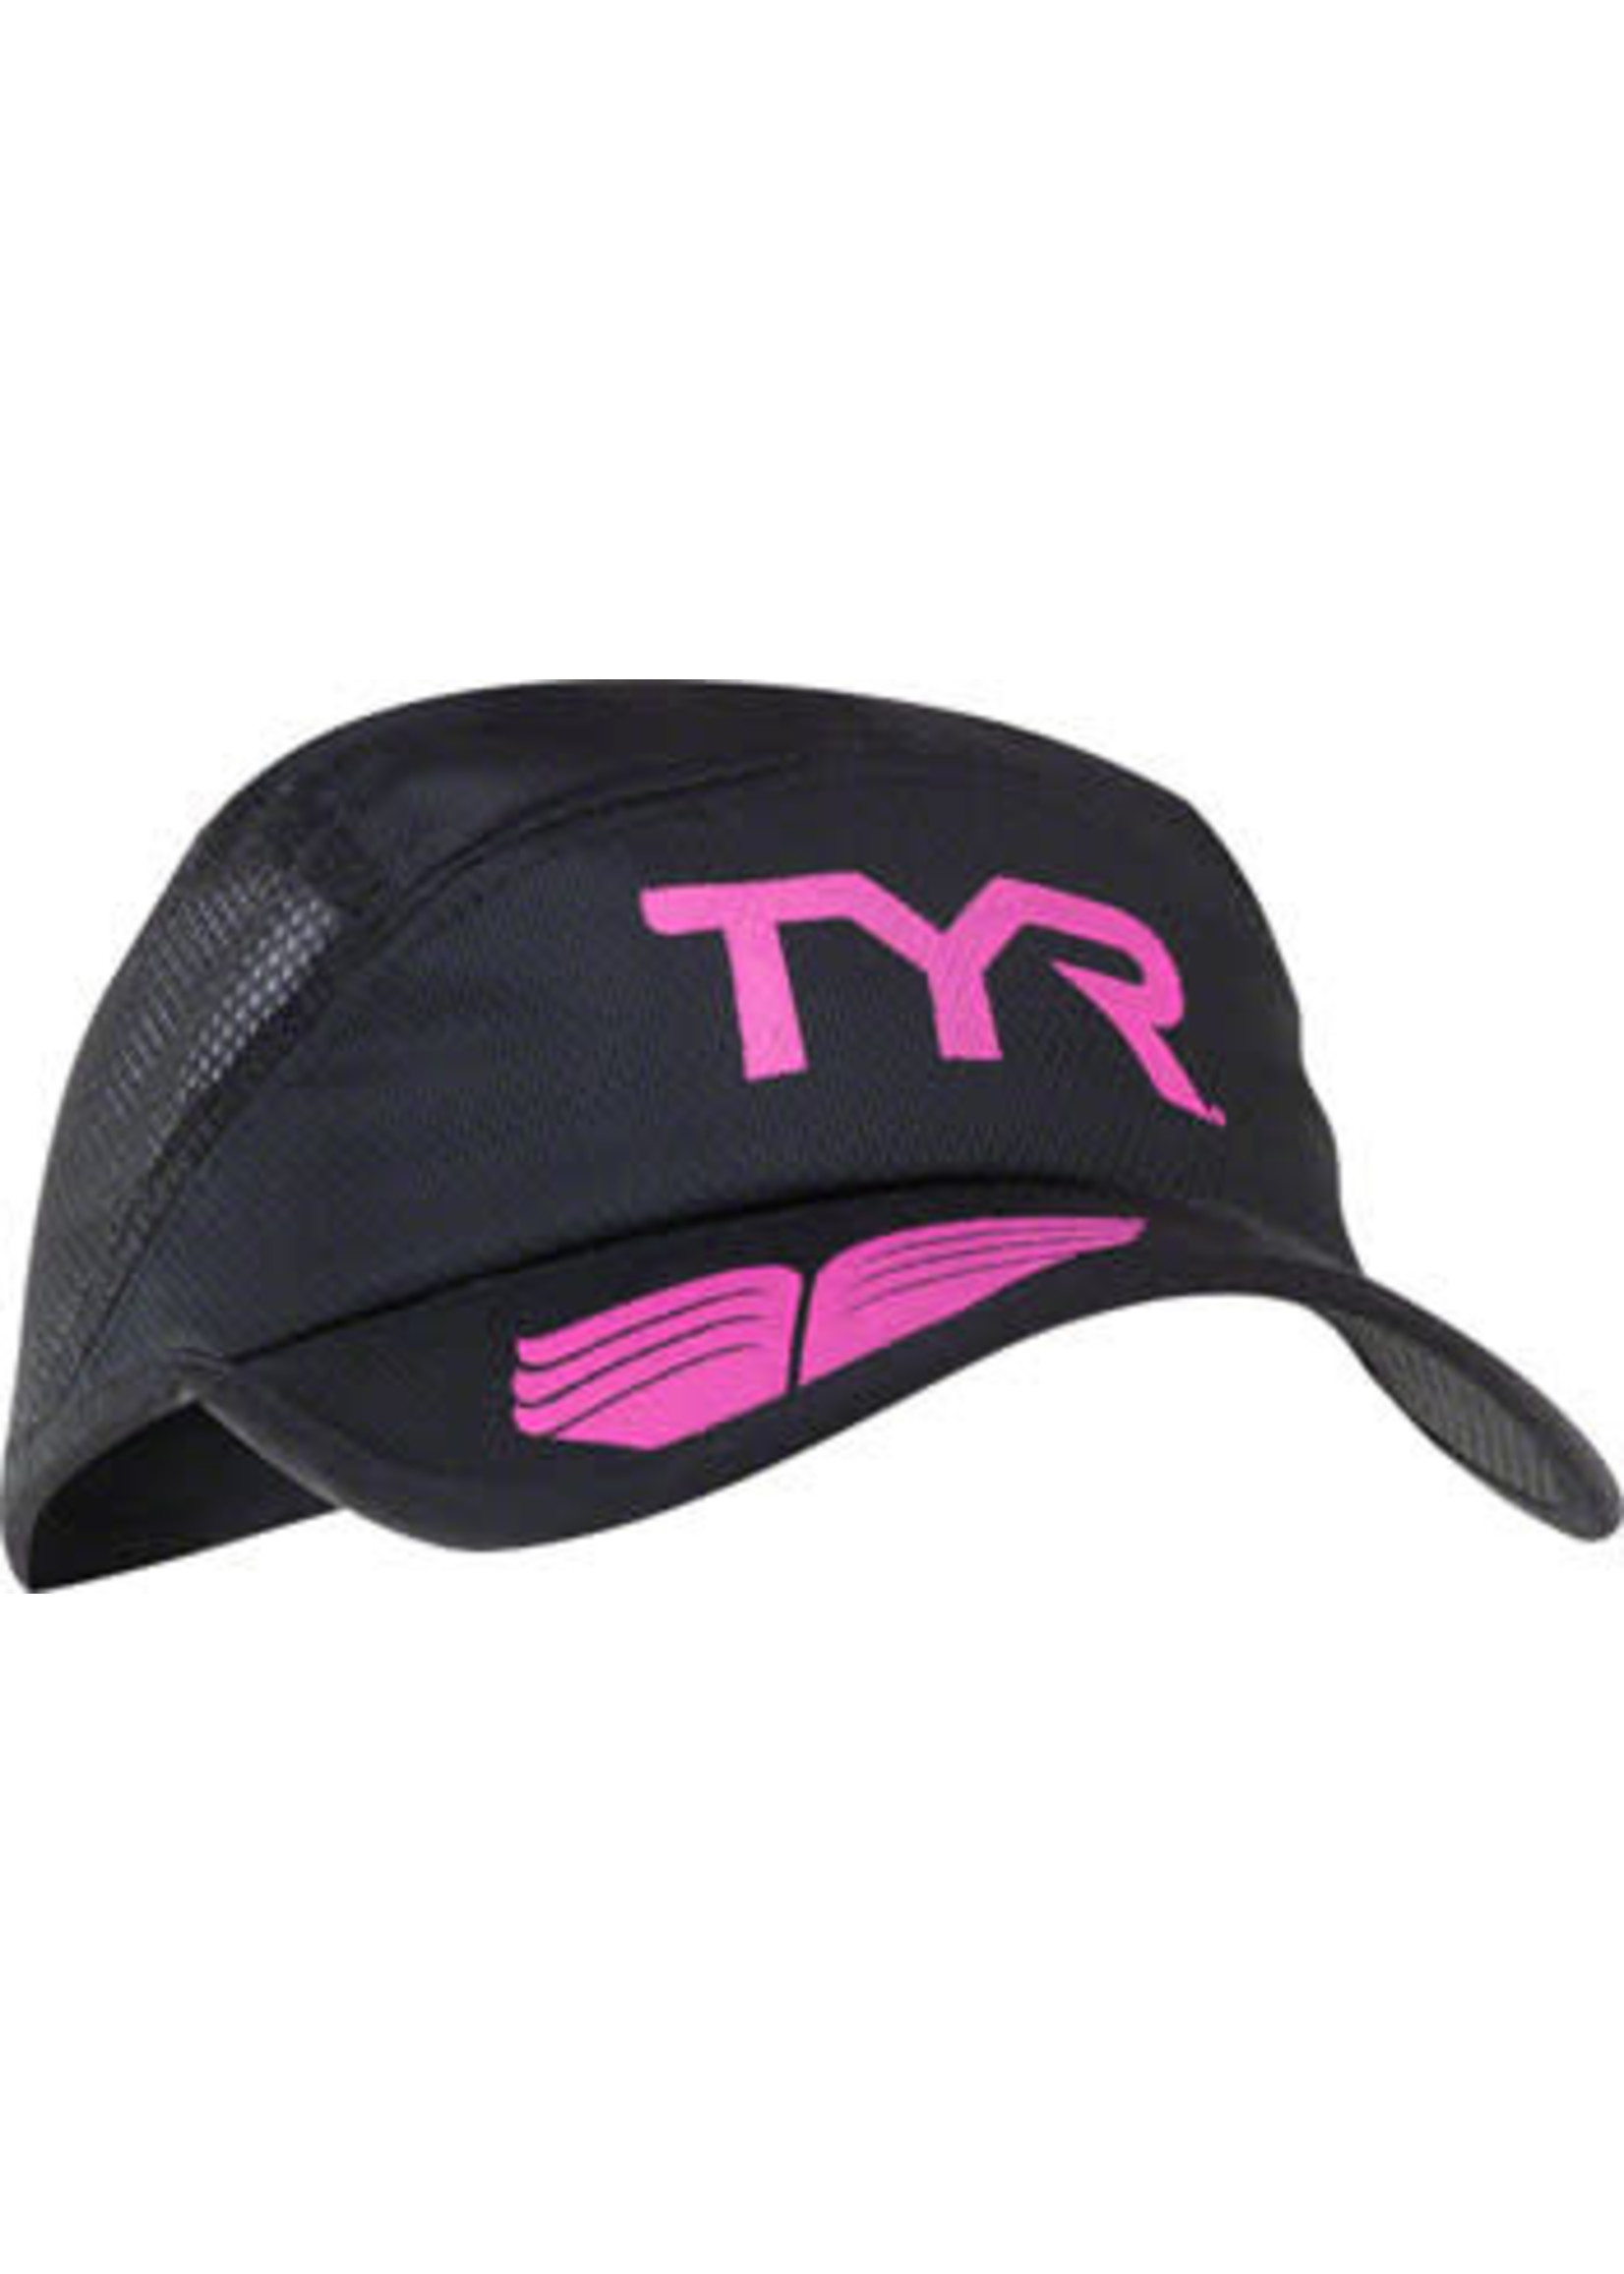 TYR TYR Competitor Running Cap: Black/Pink One Size